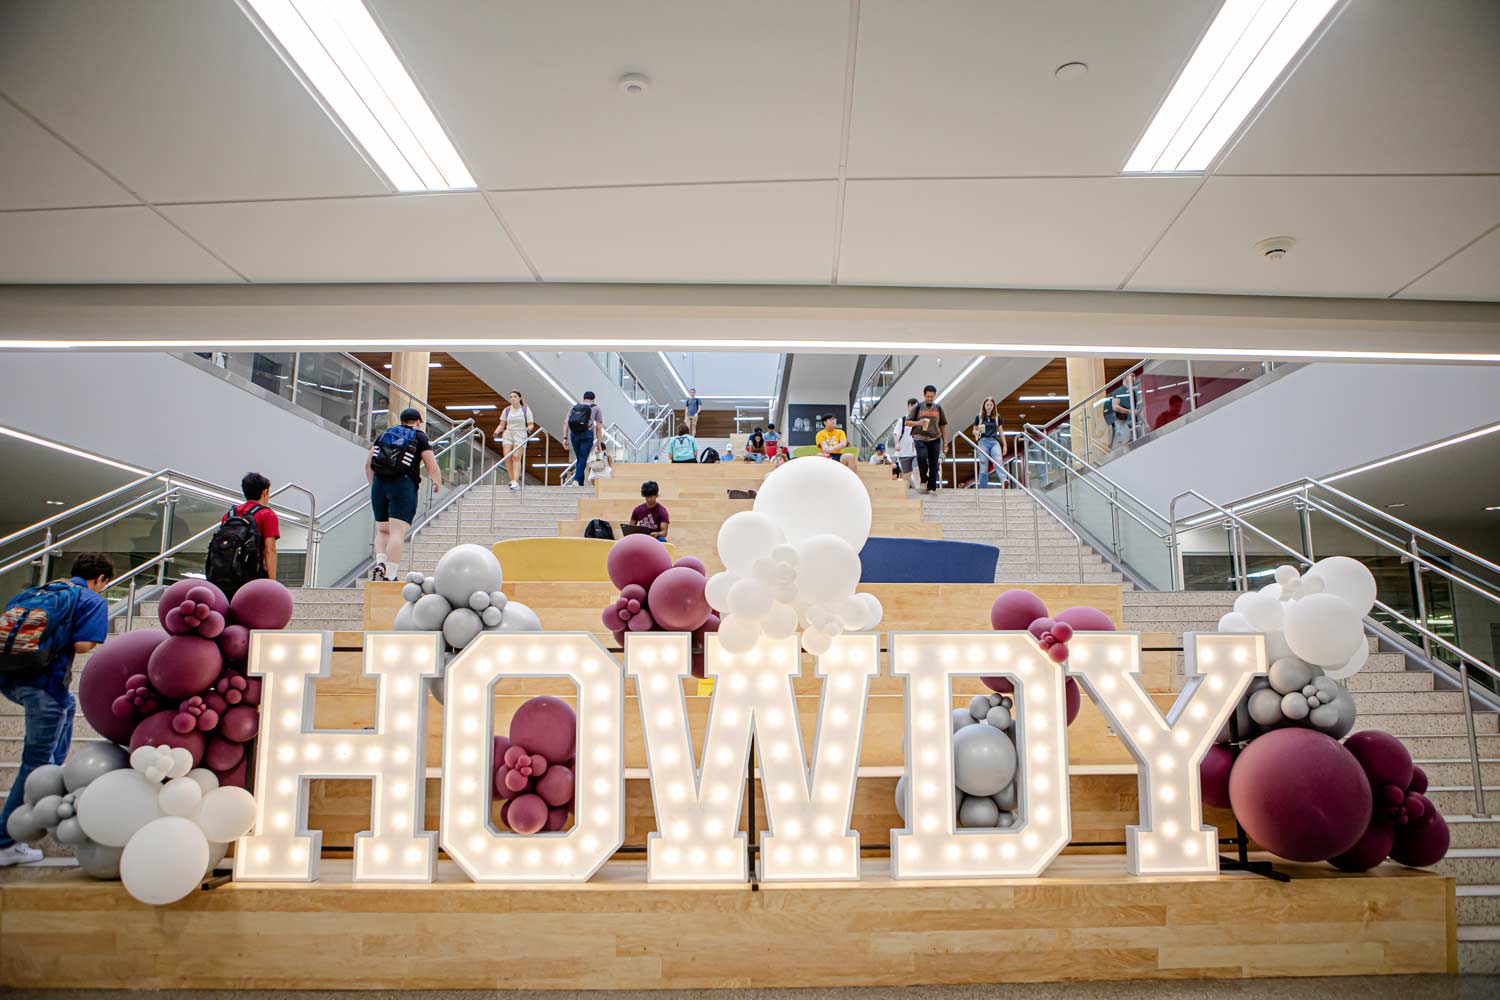 Light-up HOWDY sign on the indoor main staircase of Zachry Engineering Education Complex on the Texas A&M Campus